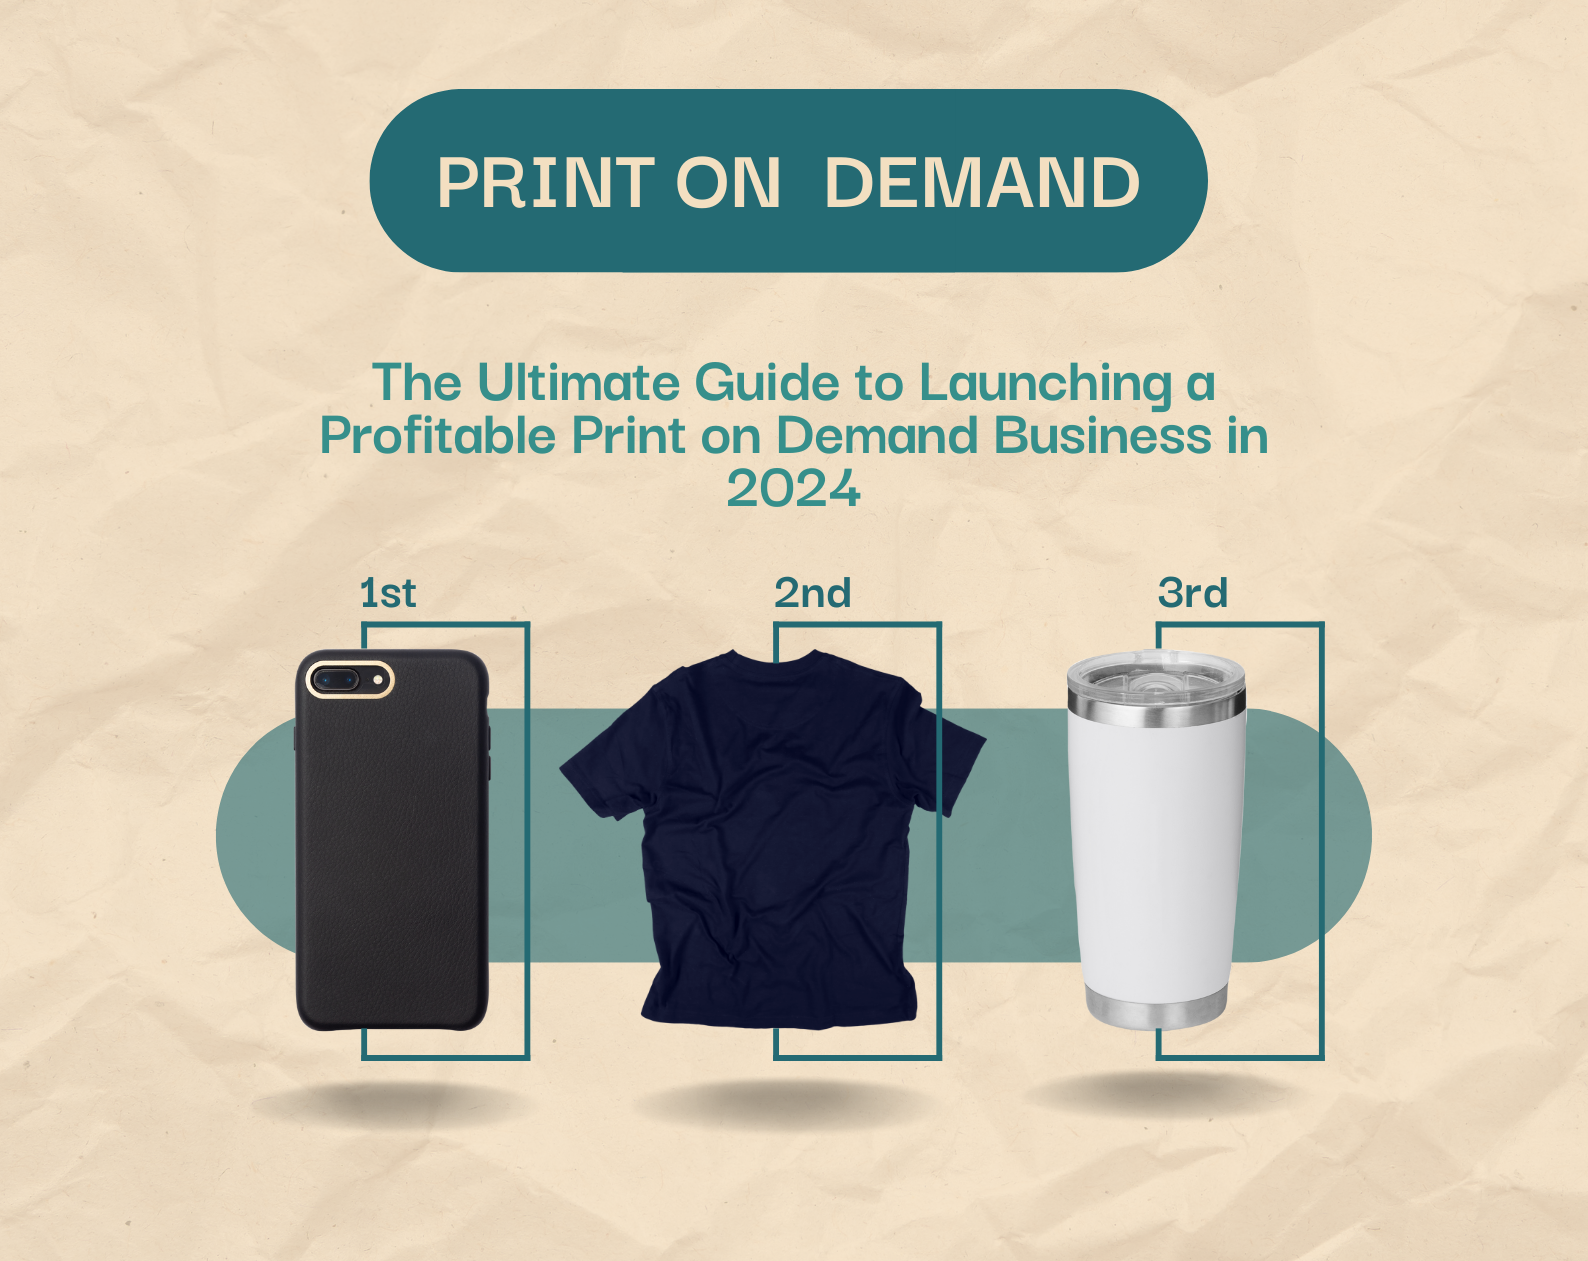 The Ultimate Guide to Launching a Profitable Print on Demand Business in 2024